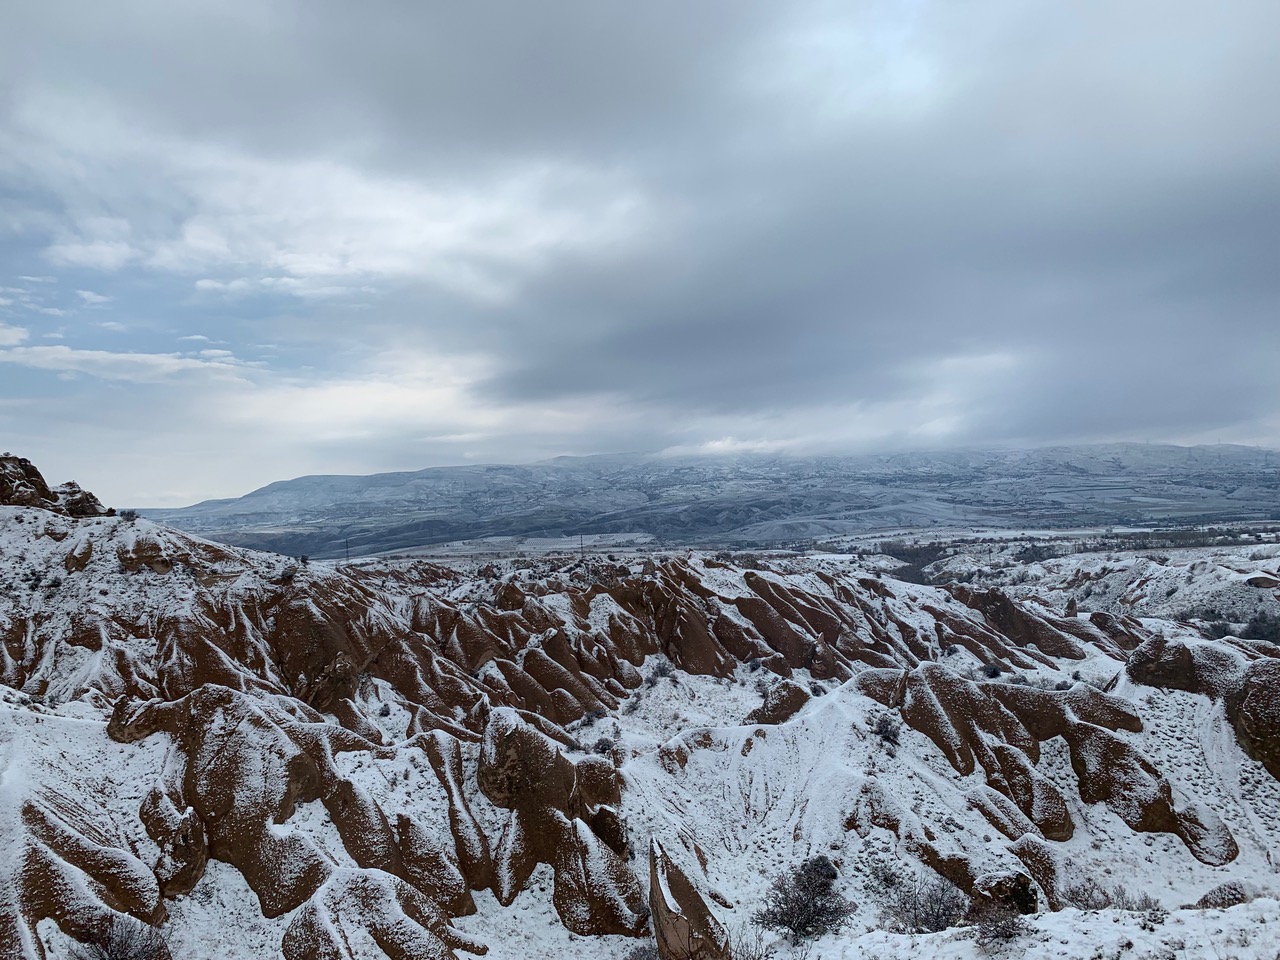 light dusting of snow over a red-ish landscape of tufa formations